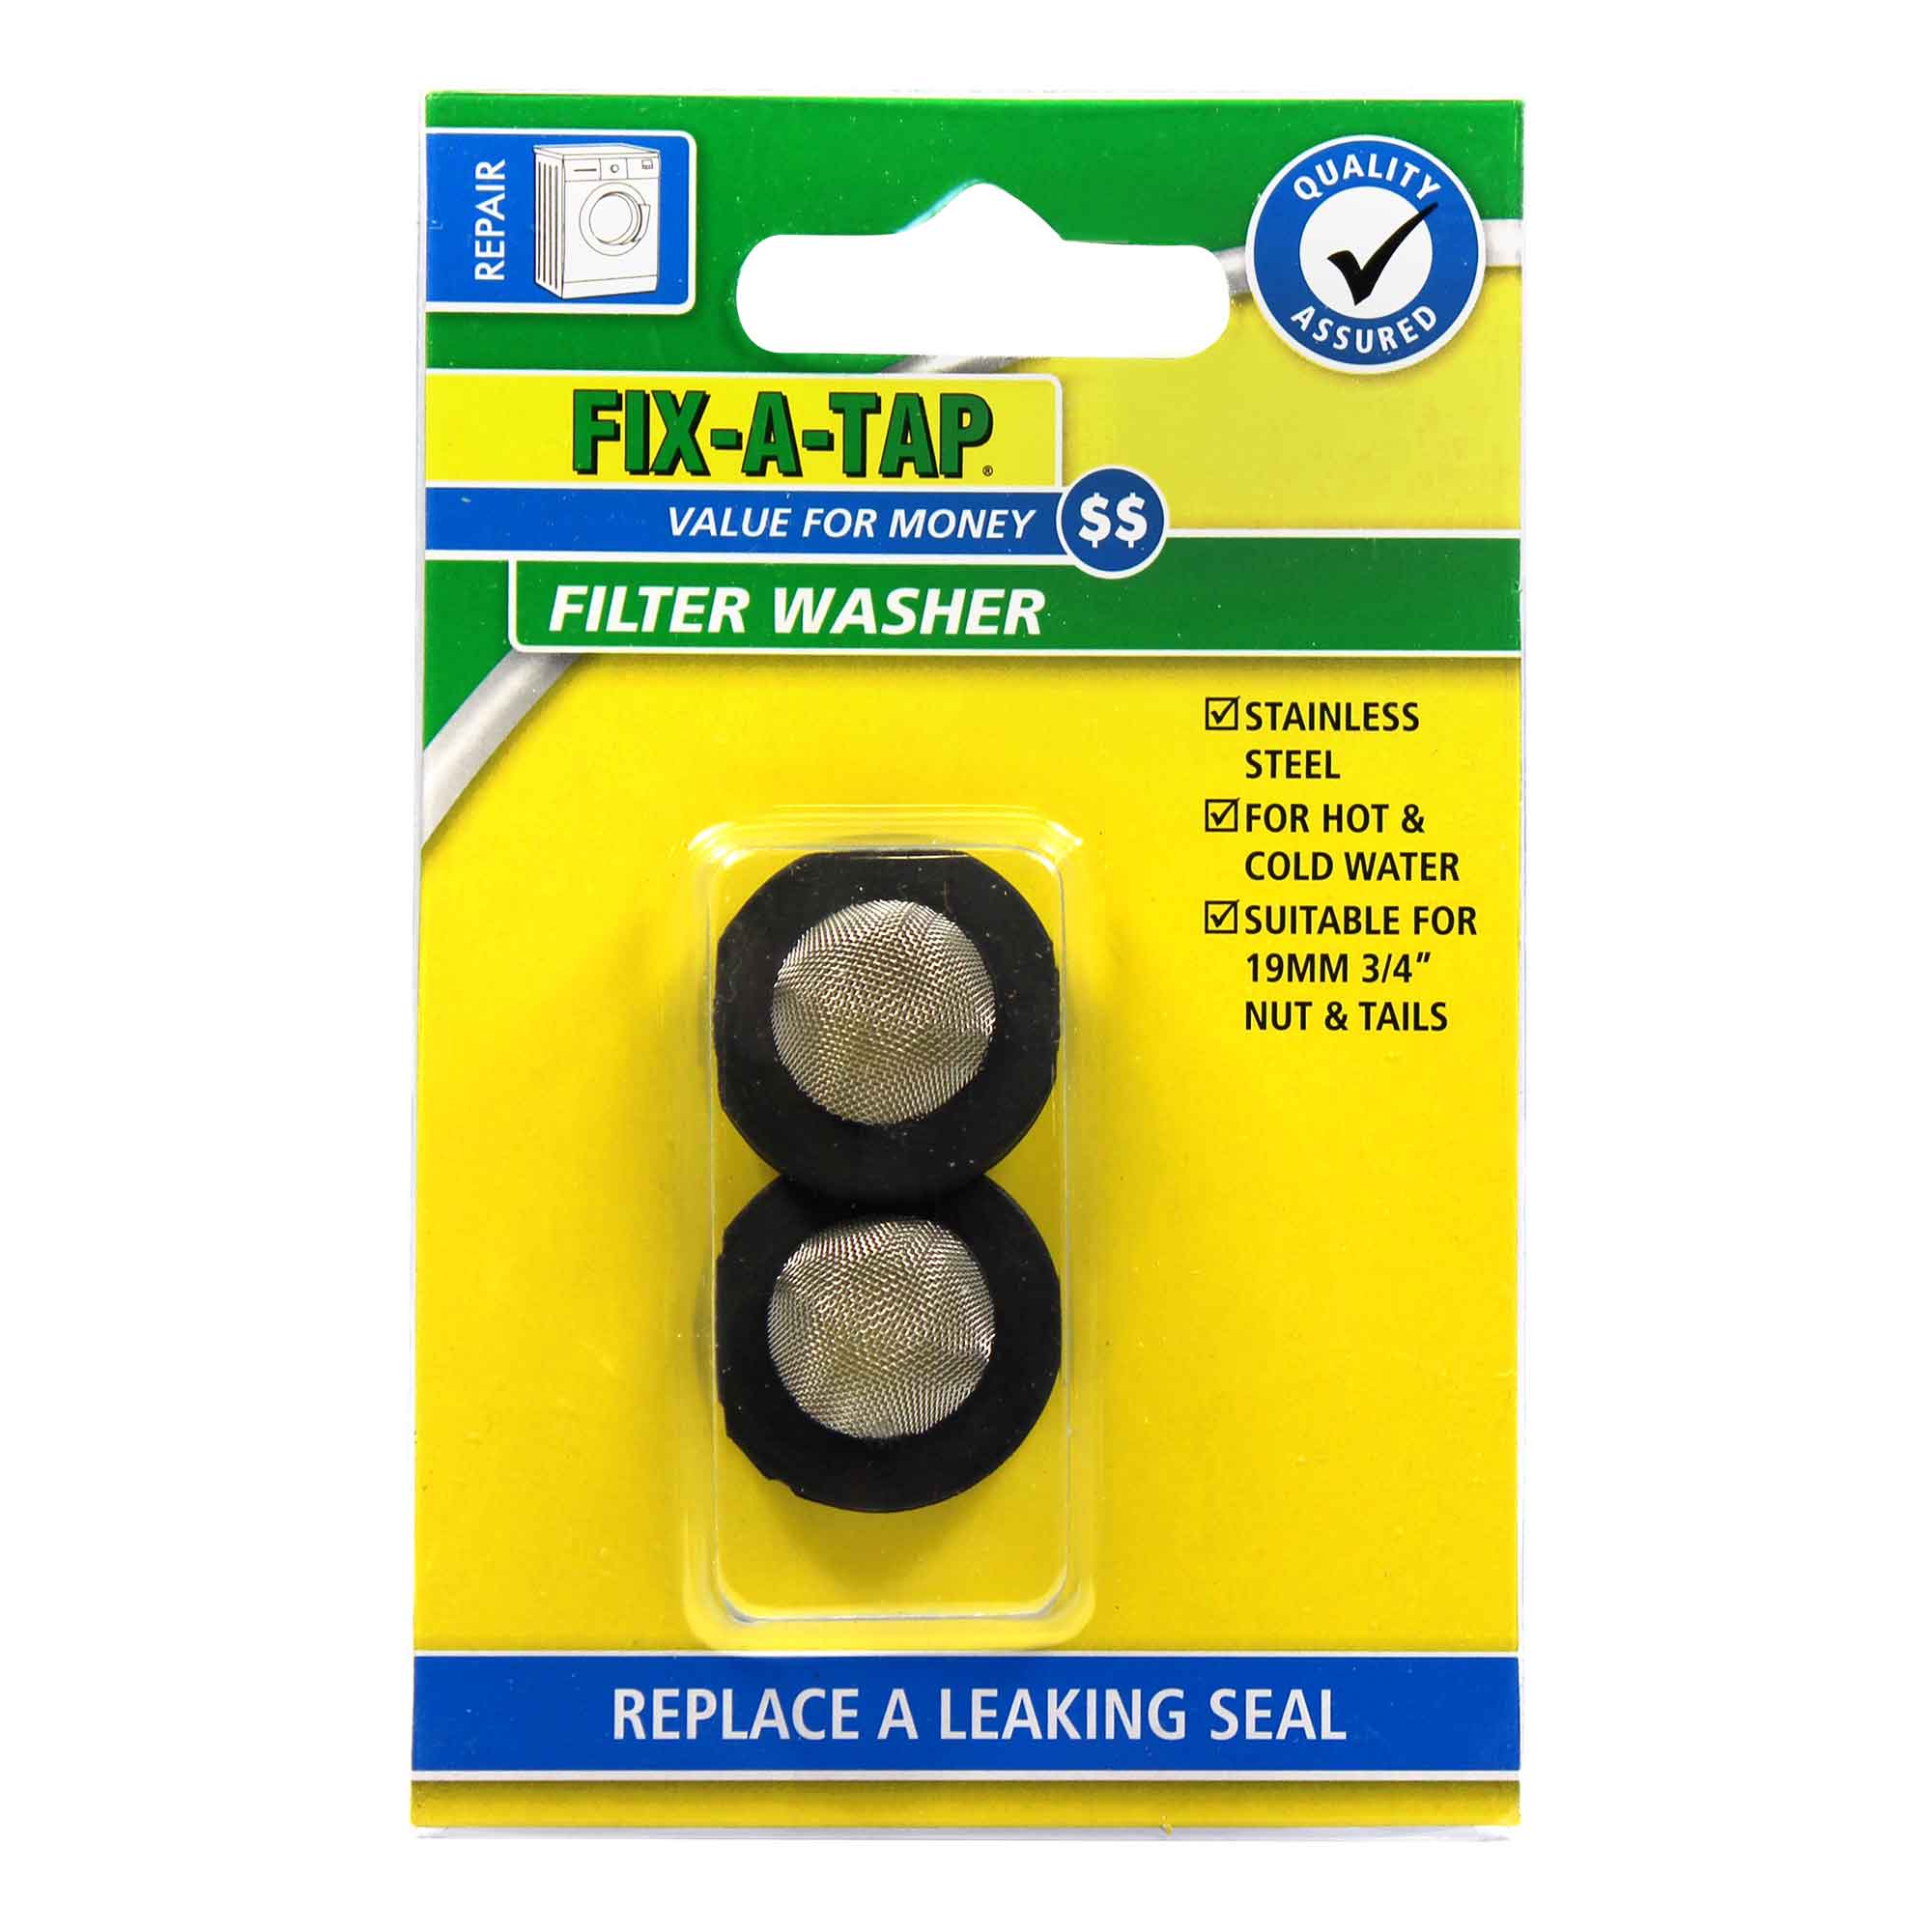 FIX-A-TAP Filter Washer Suits 19mm 3/4" Nut & Tails 209221 - Double Bay Hardware